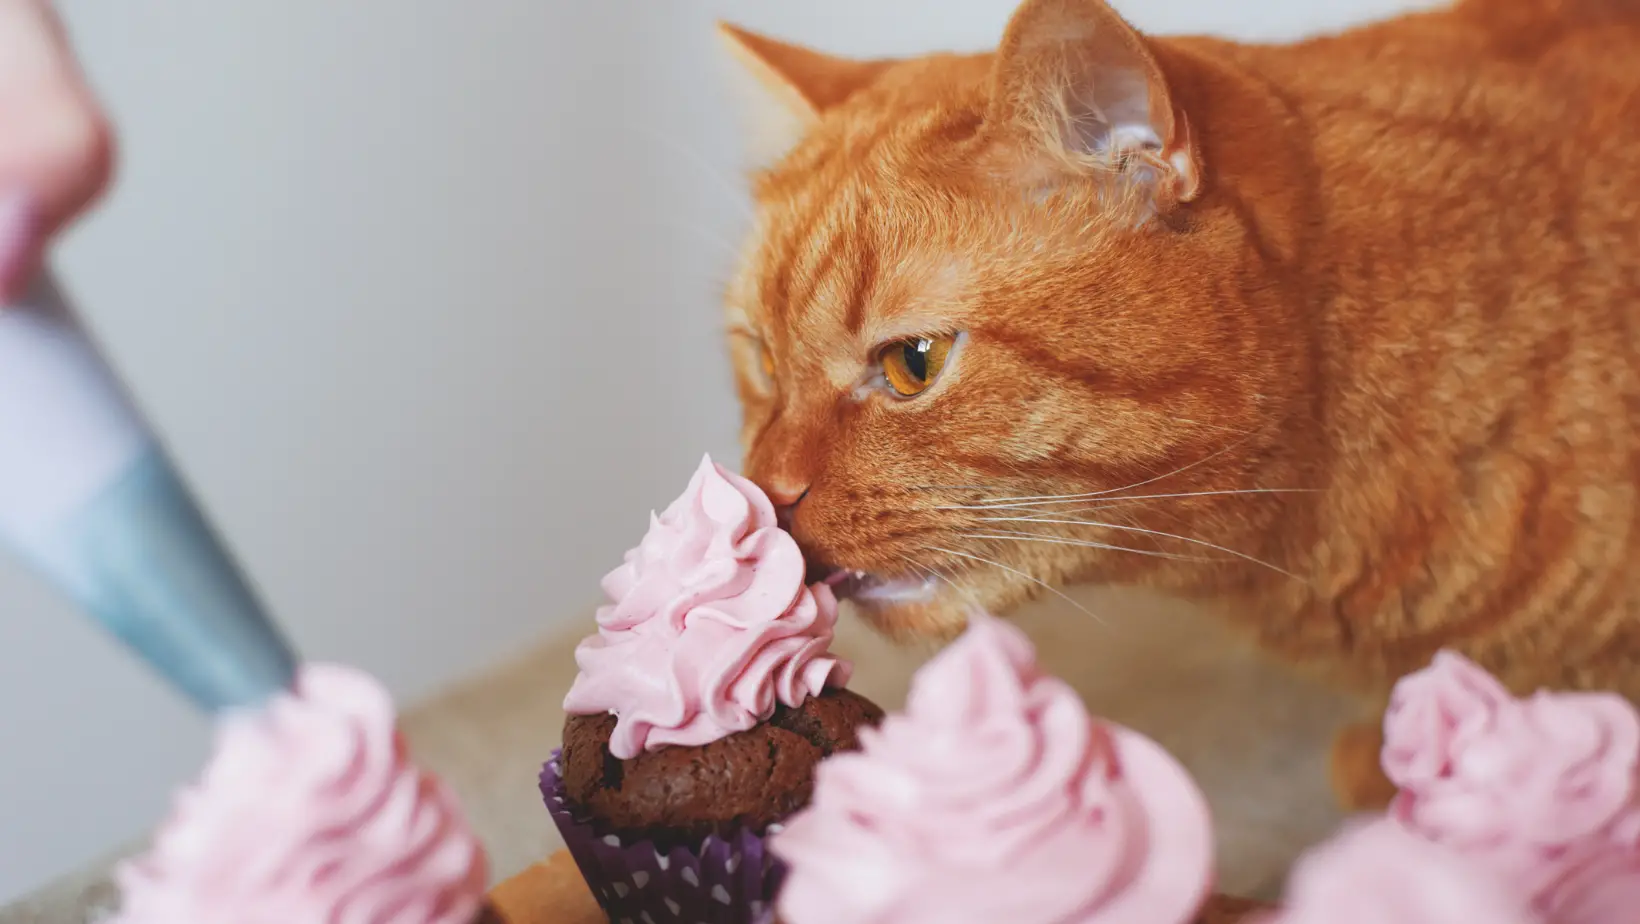 Can Cats Taste Sweetness?